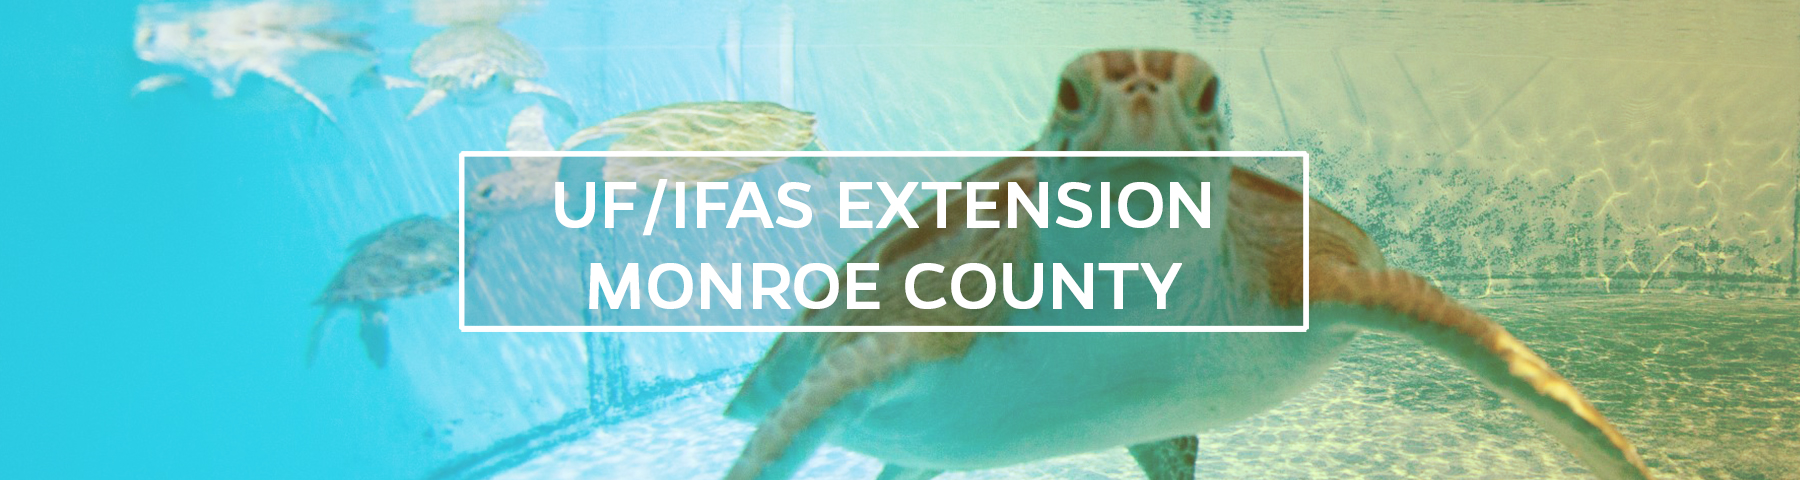 UF/IFAS Extension Monroe County